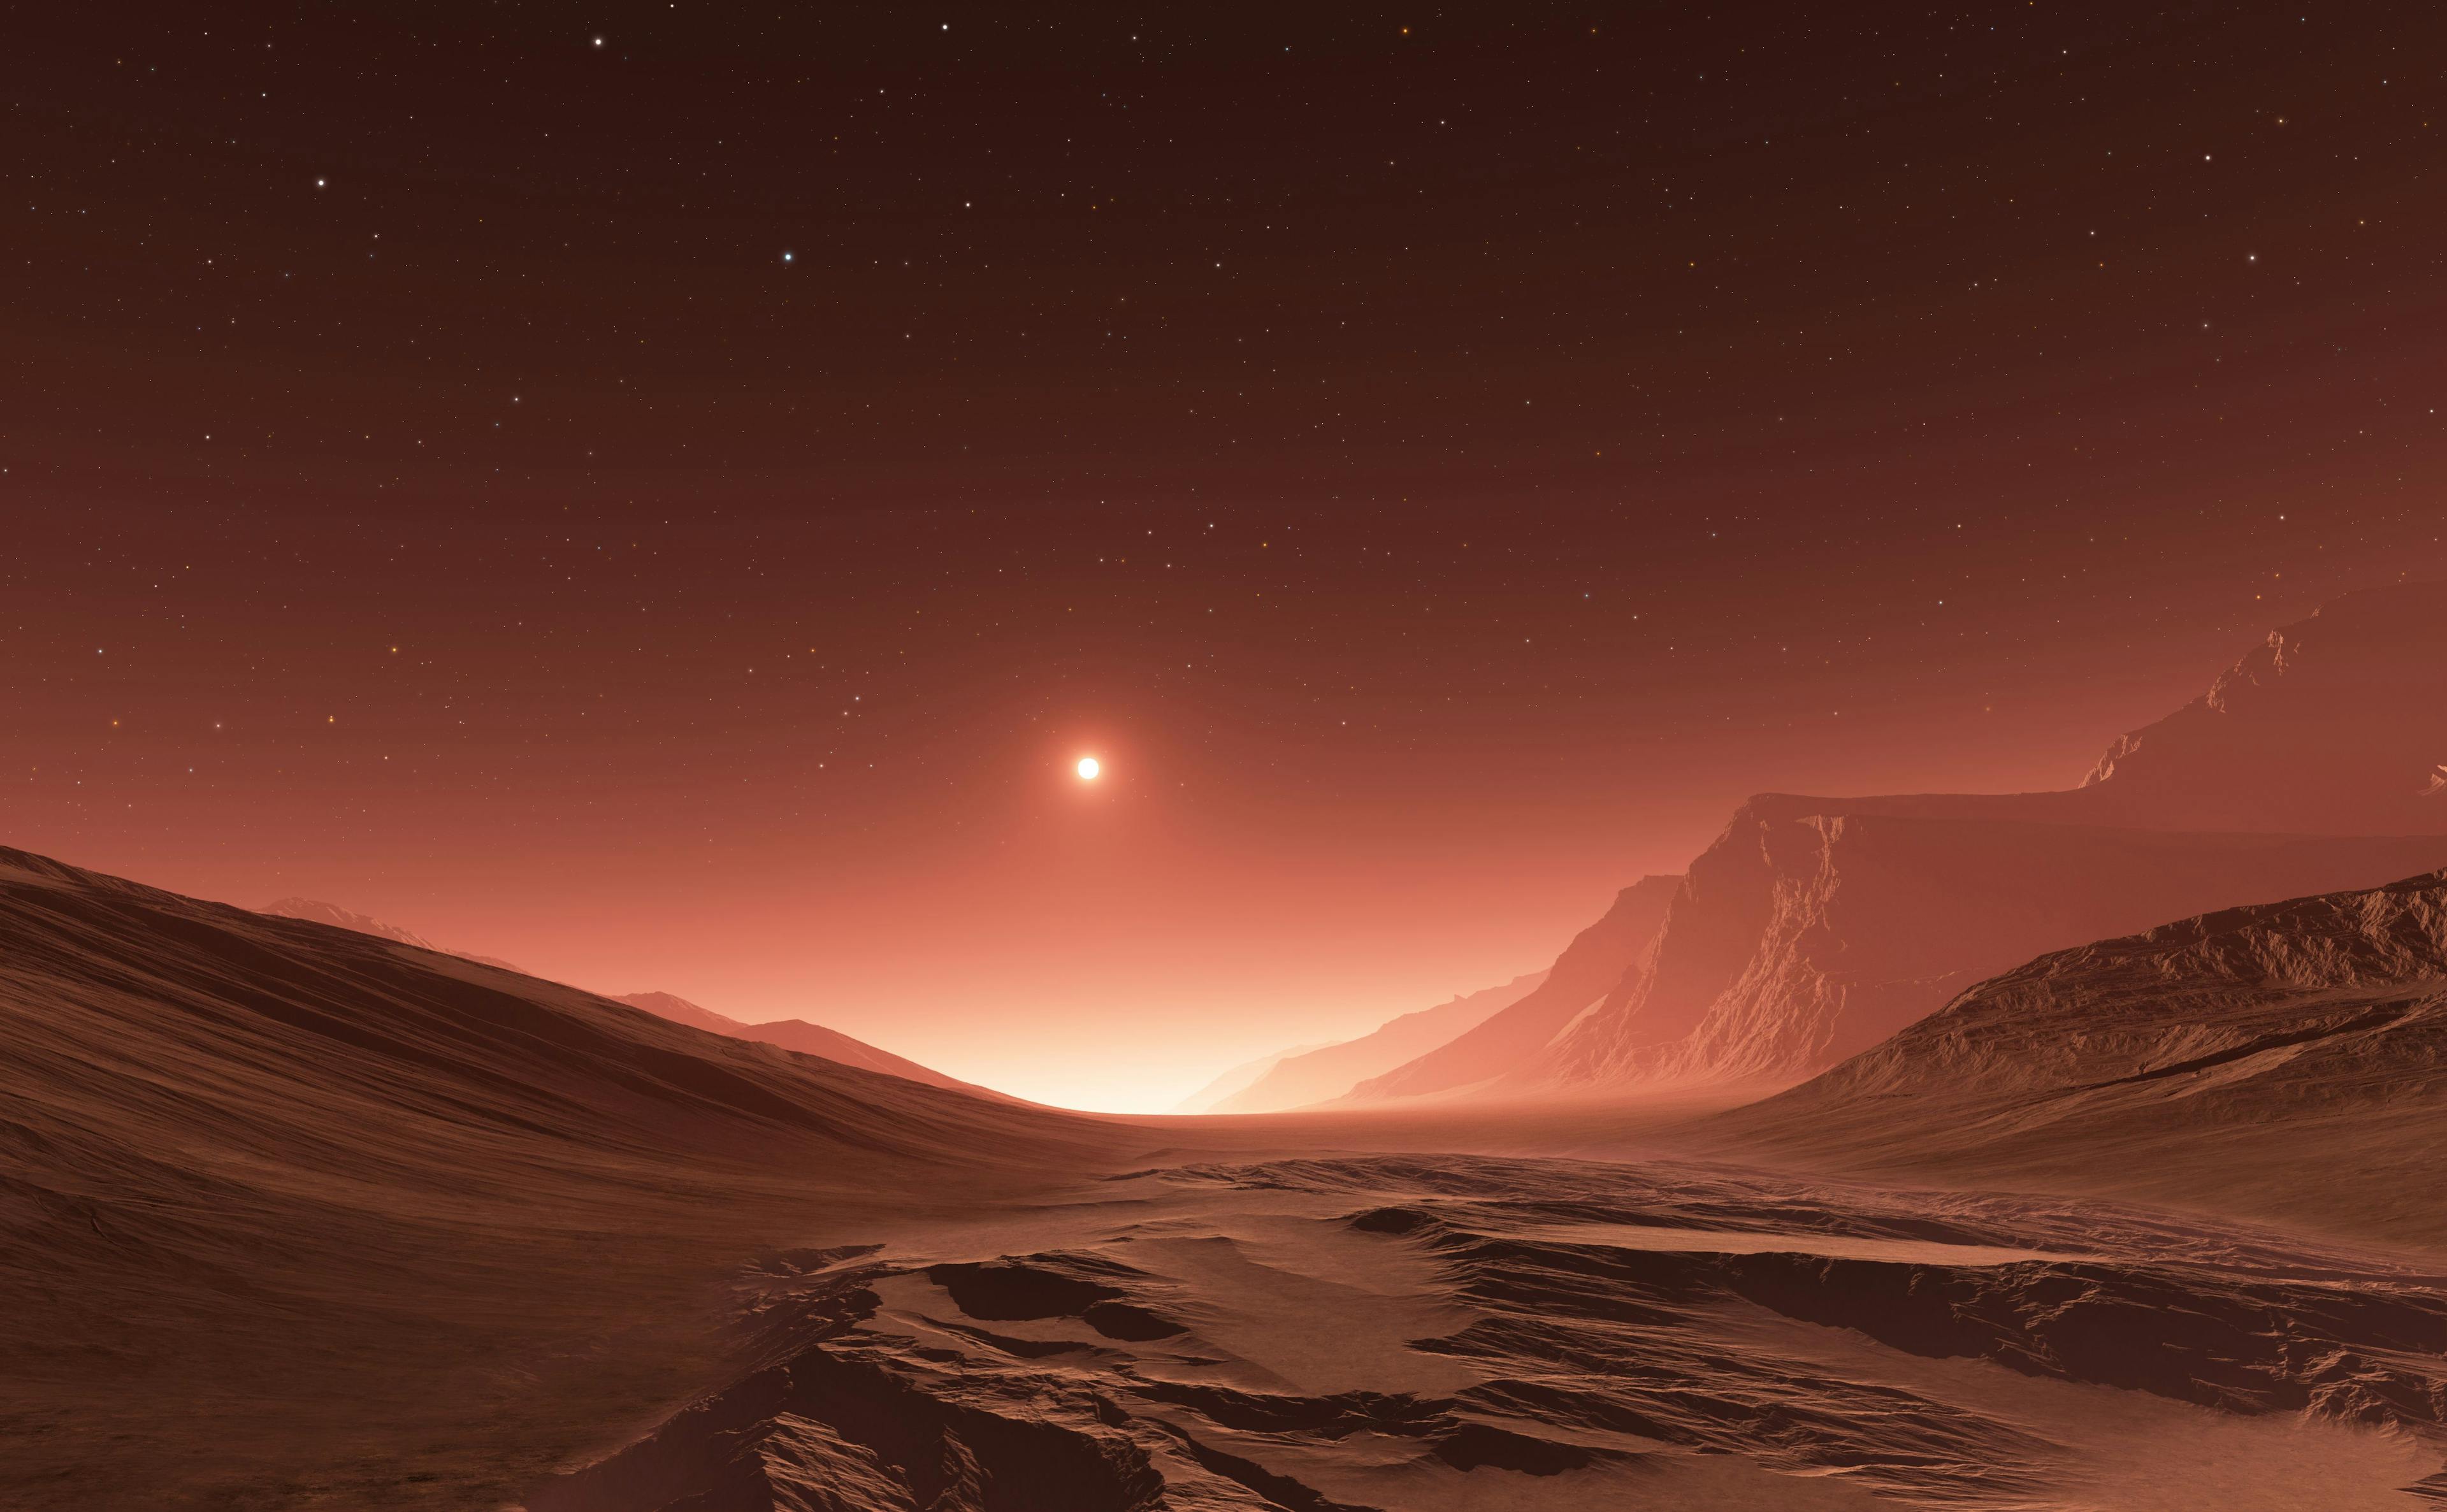 Sunset on Mars. Mars mountains, view from the valley | Image Credit: © Peter Jurik - stock.adobe.com